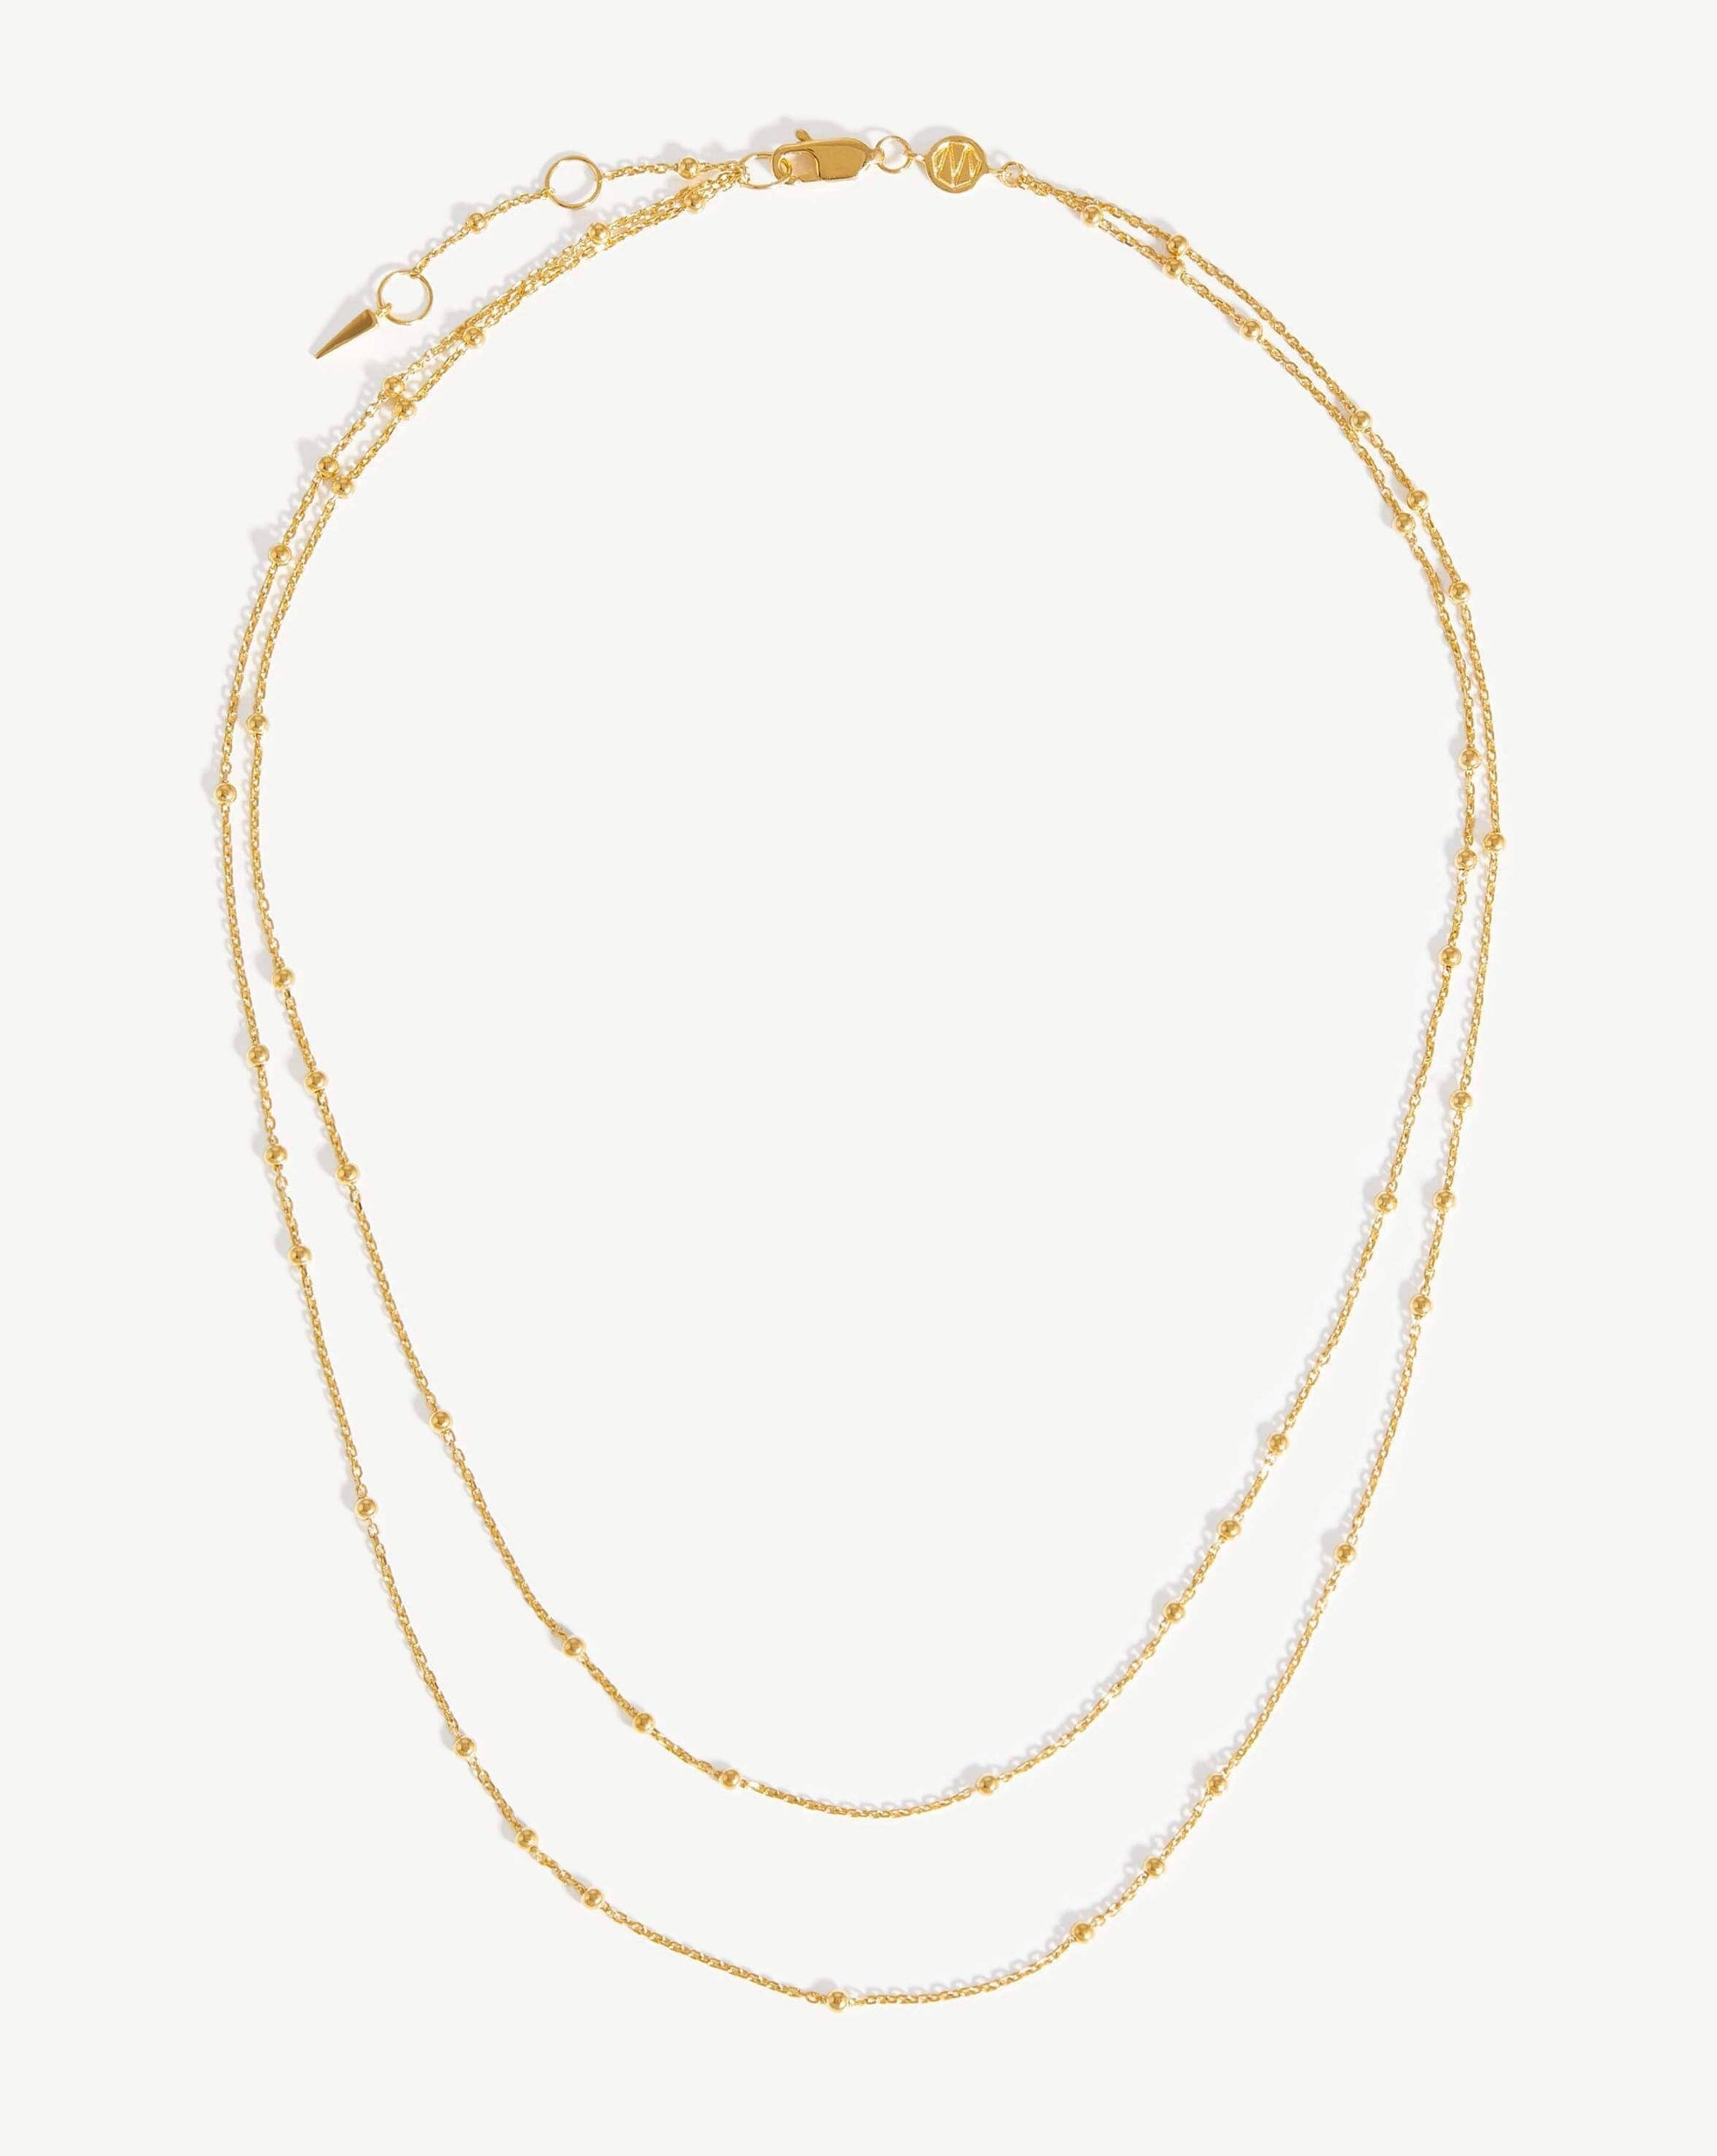 Mimmosa DOUBLE CHAIN NECKLACE